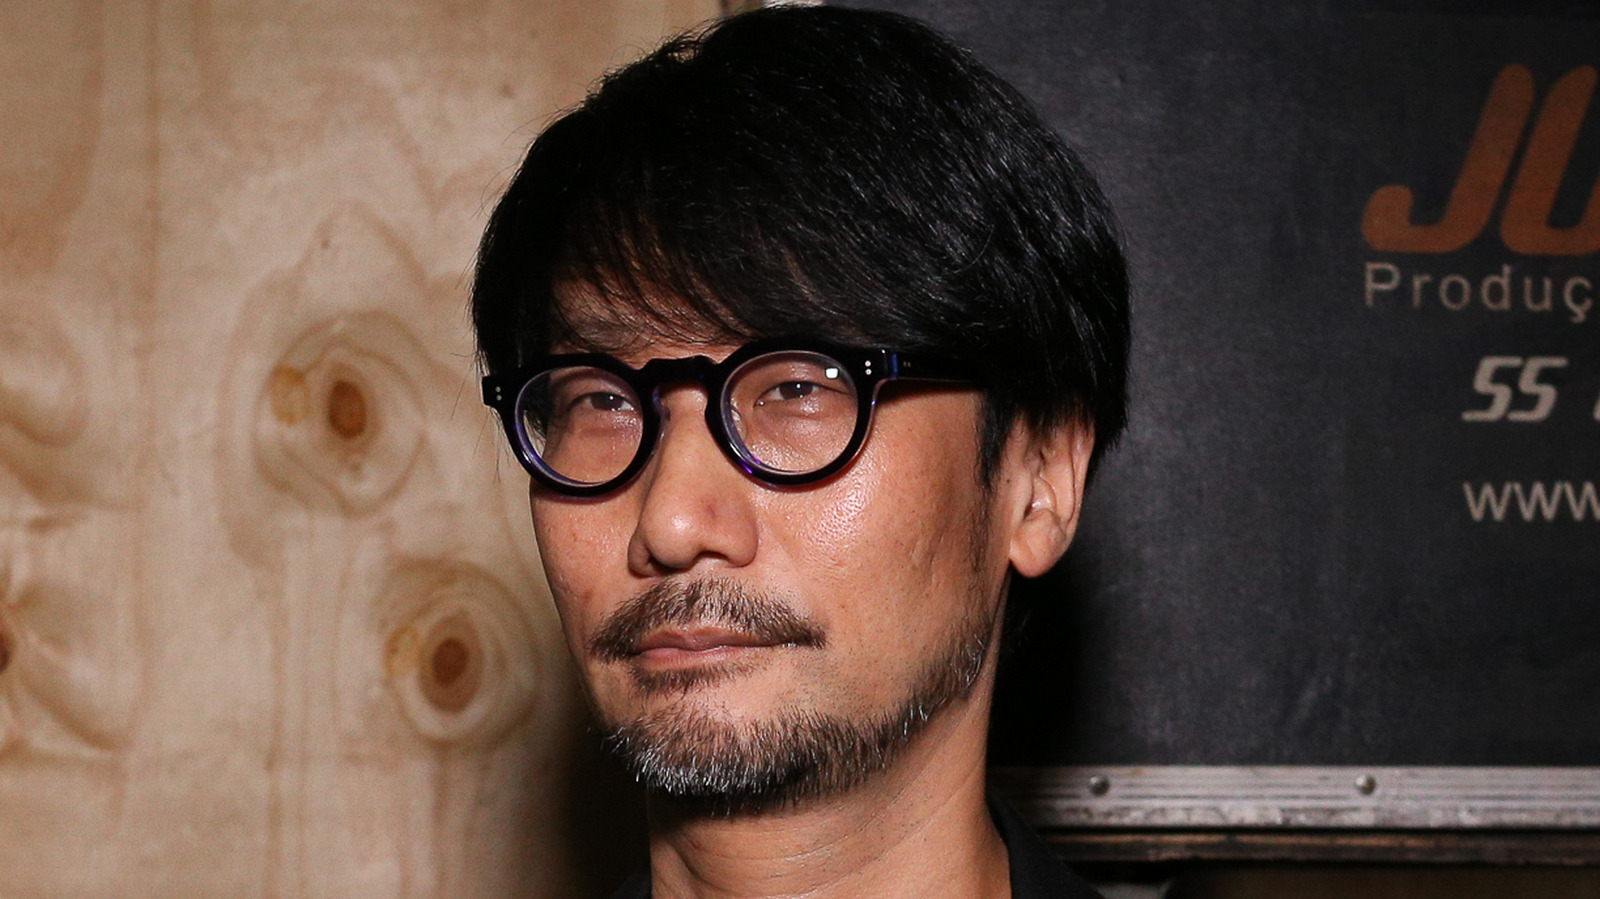 So. This seems to be Hideo Kojima's twitter account - PlayStation 4